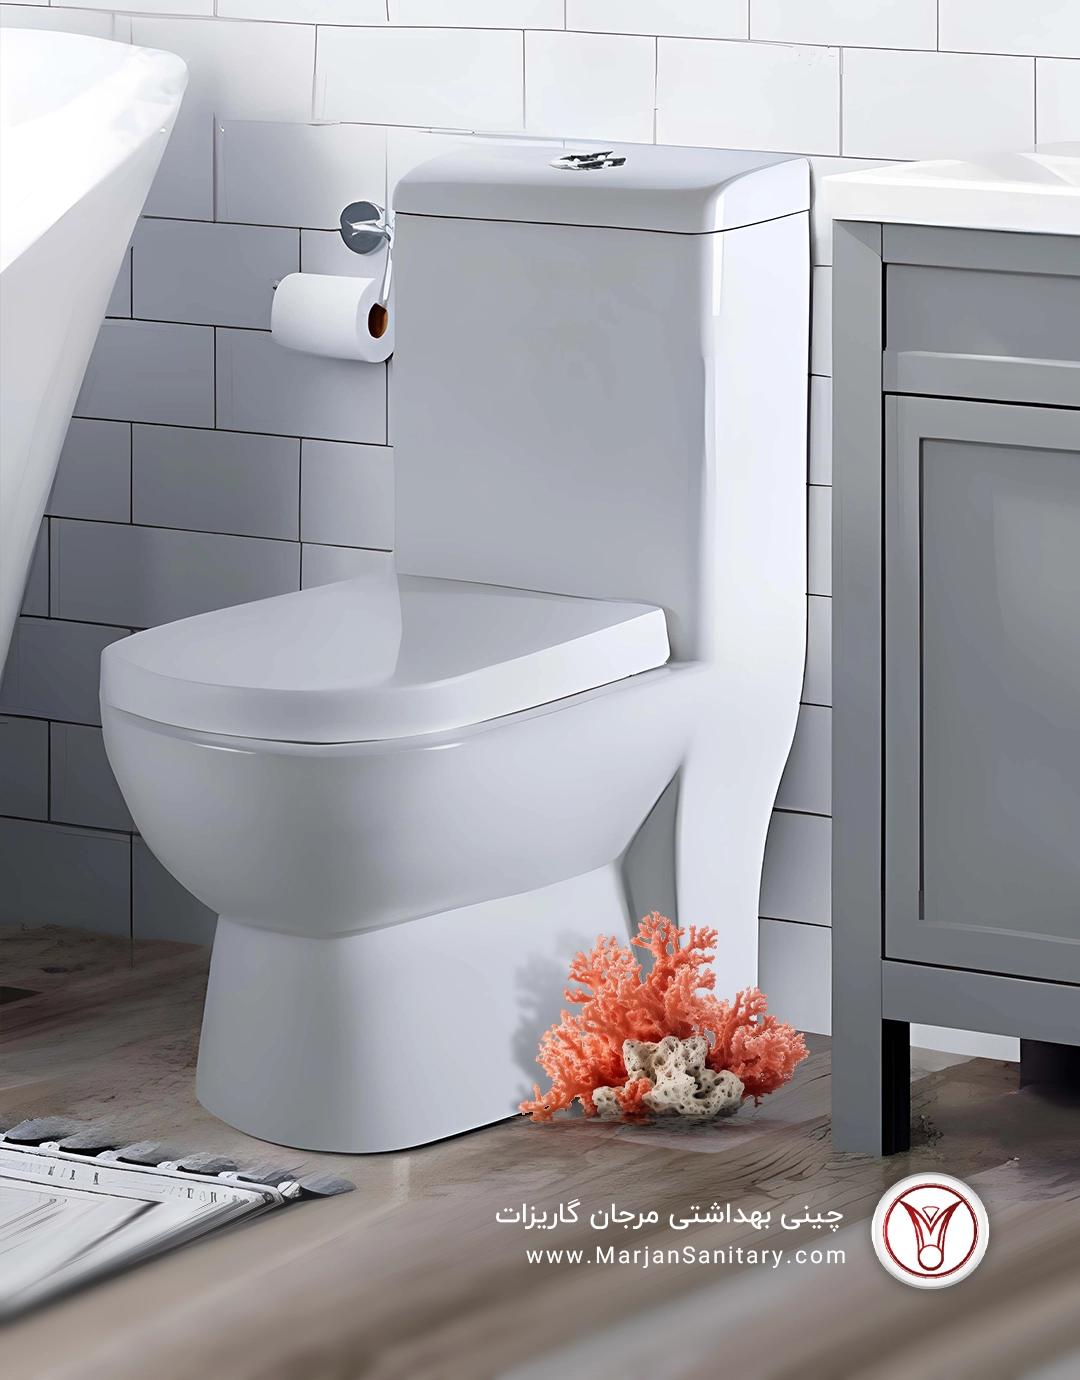 015 - product images - toilet - Minister - p